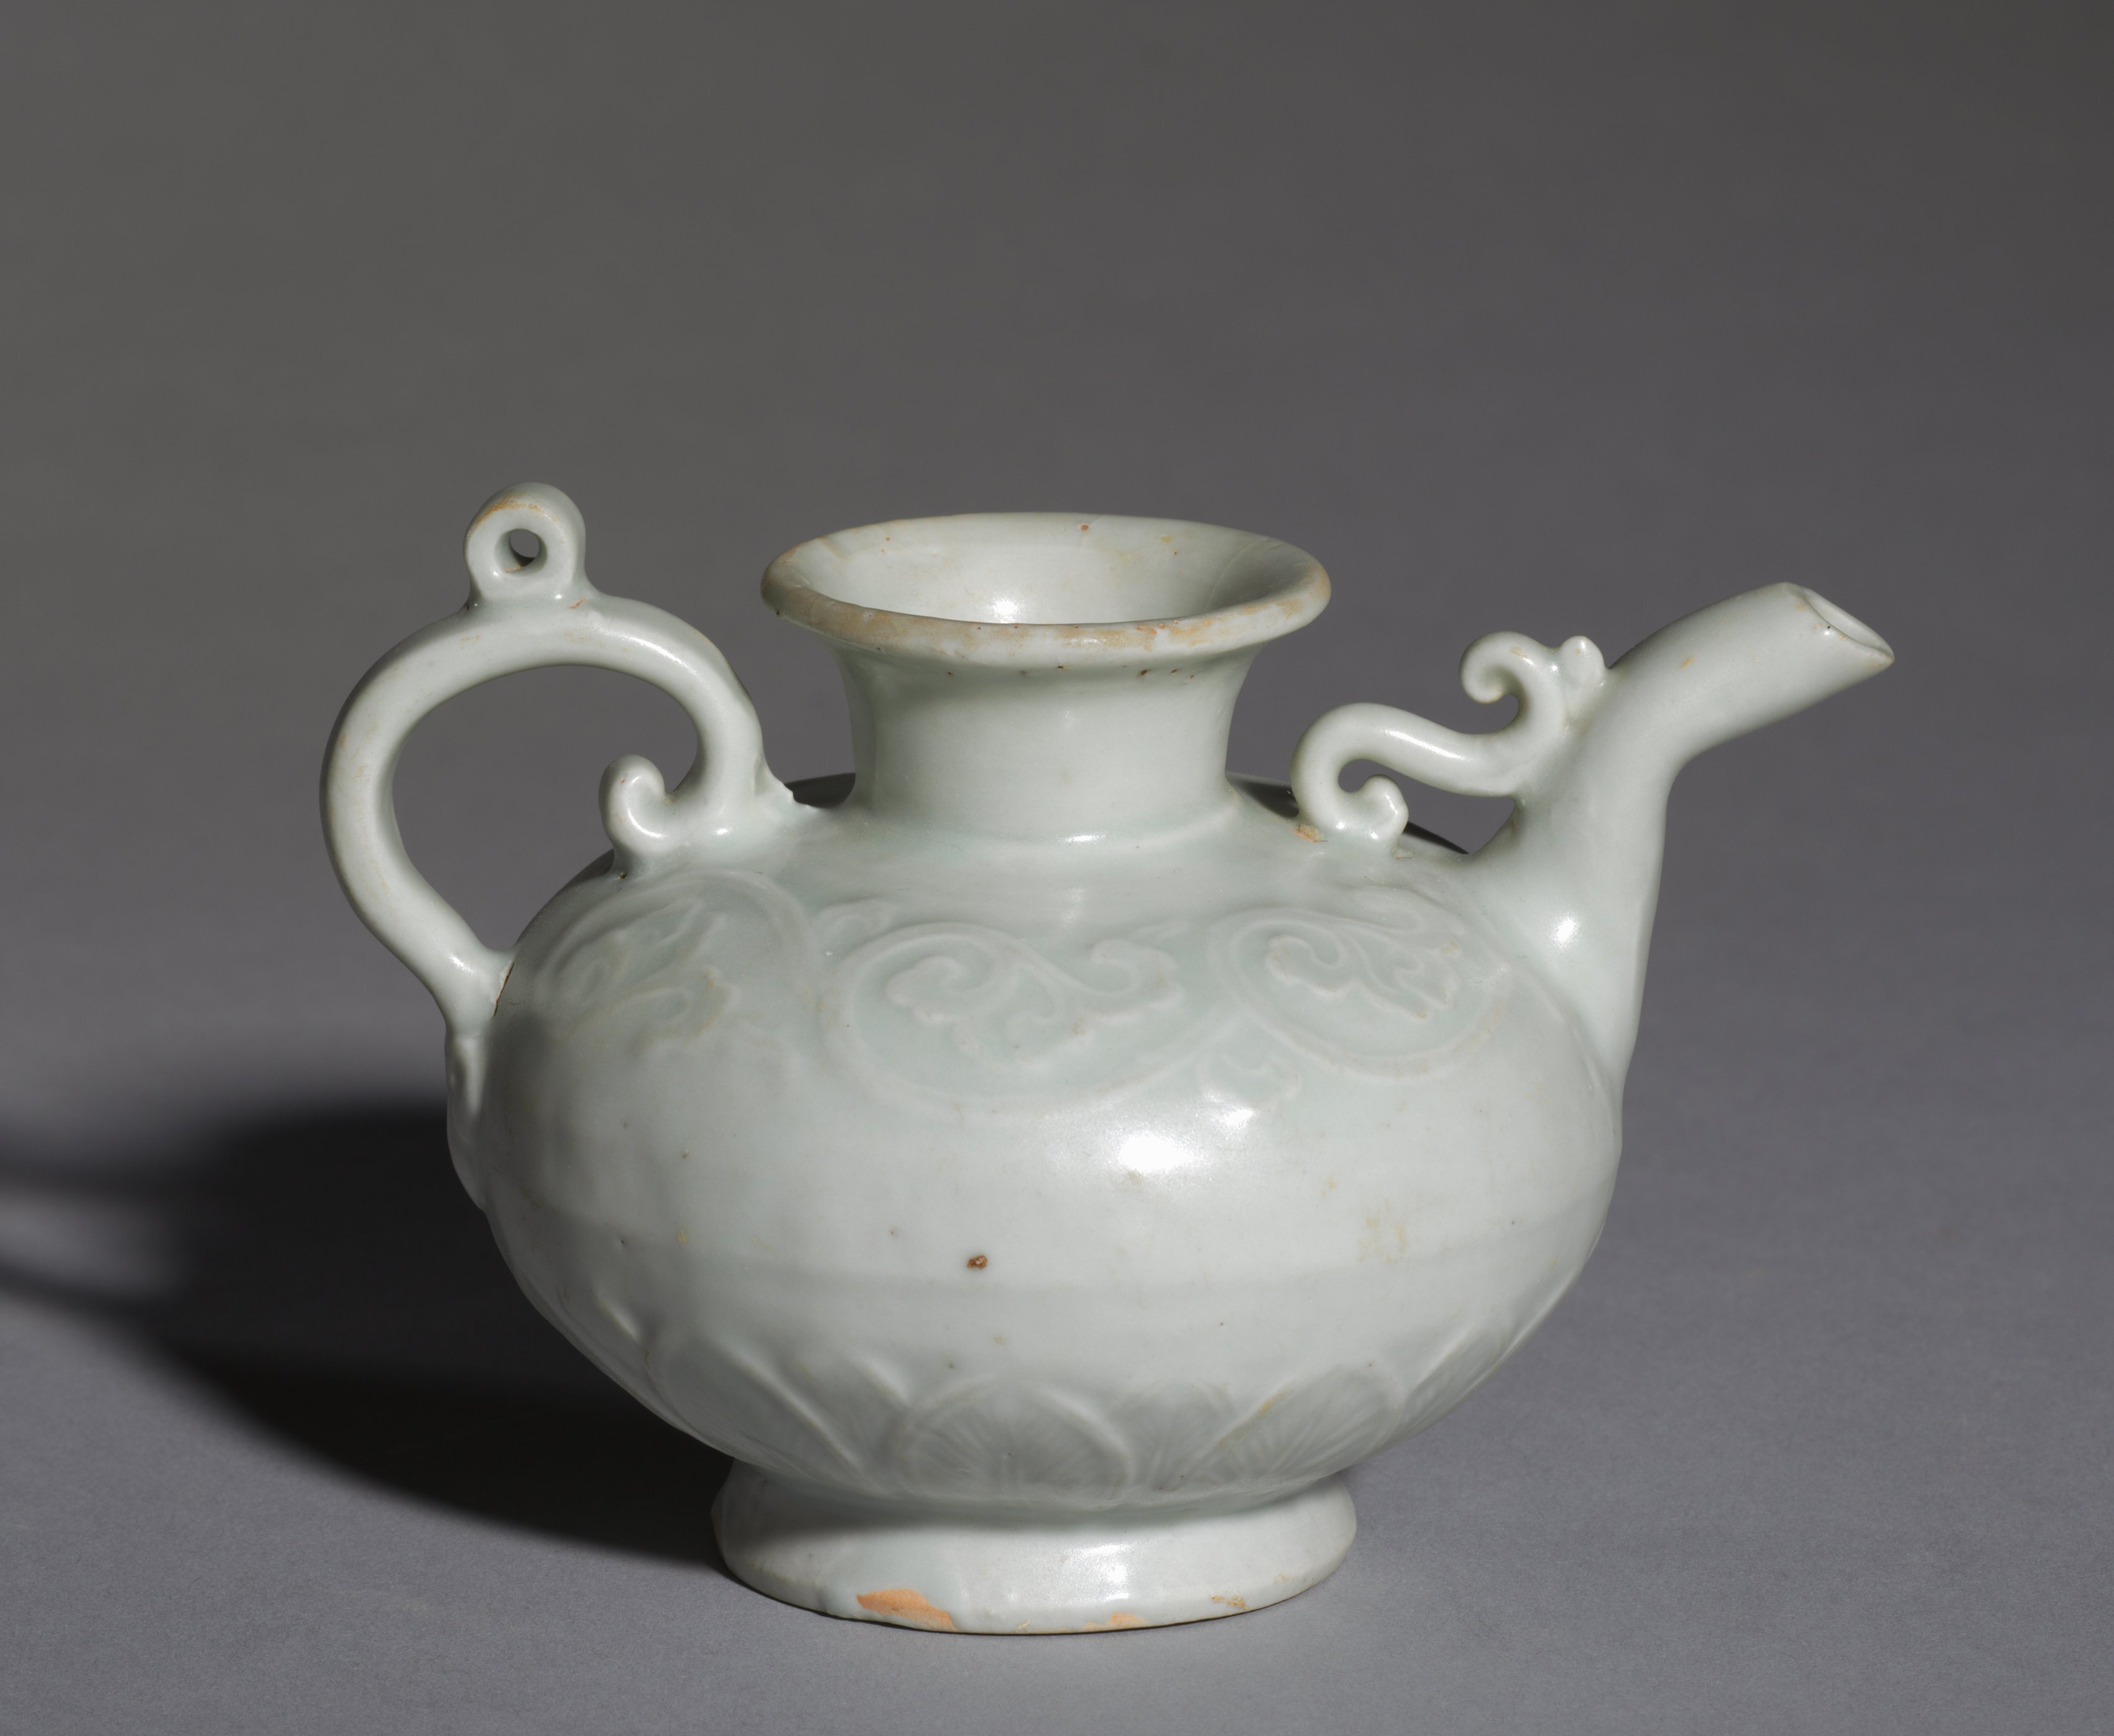 Ewer with Floral Scrolls and Plantain Leaves in Relief